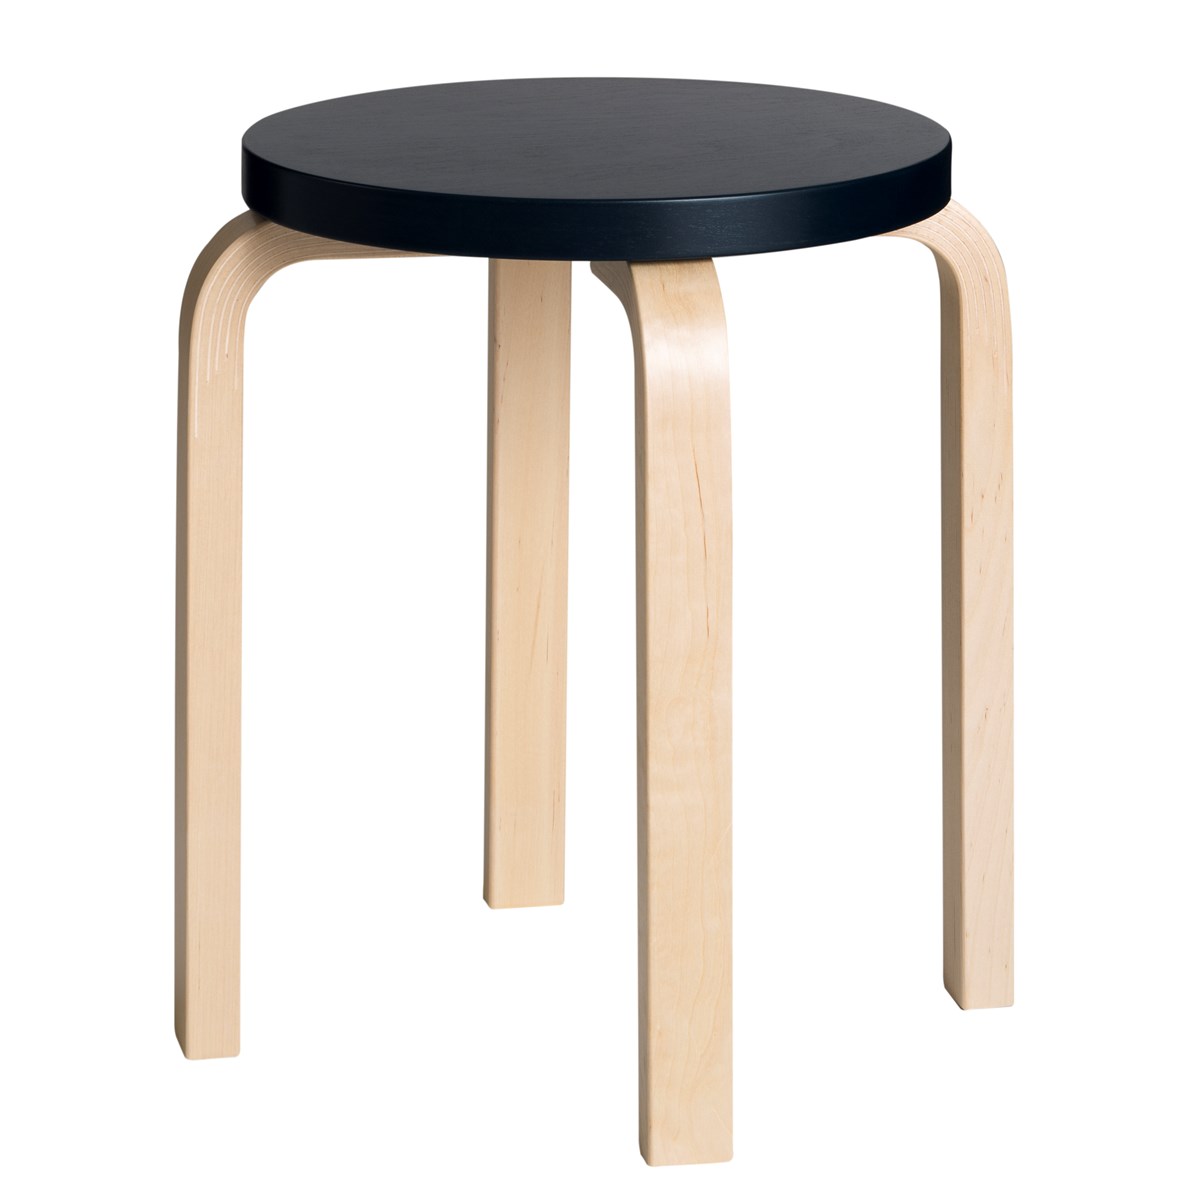 1846746 Stool E60 Clear Lacquer Black Top Master